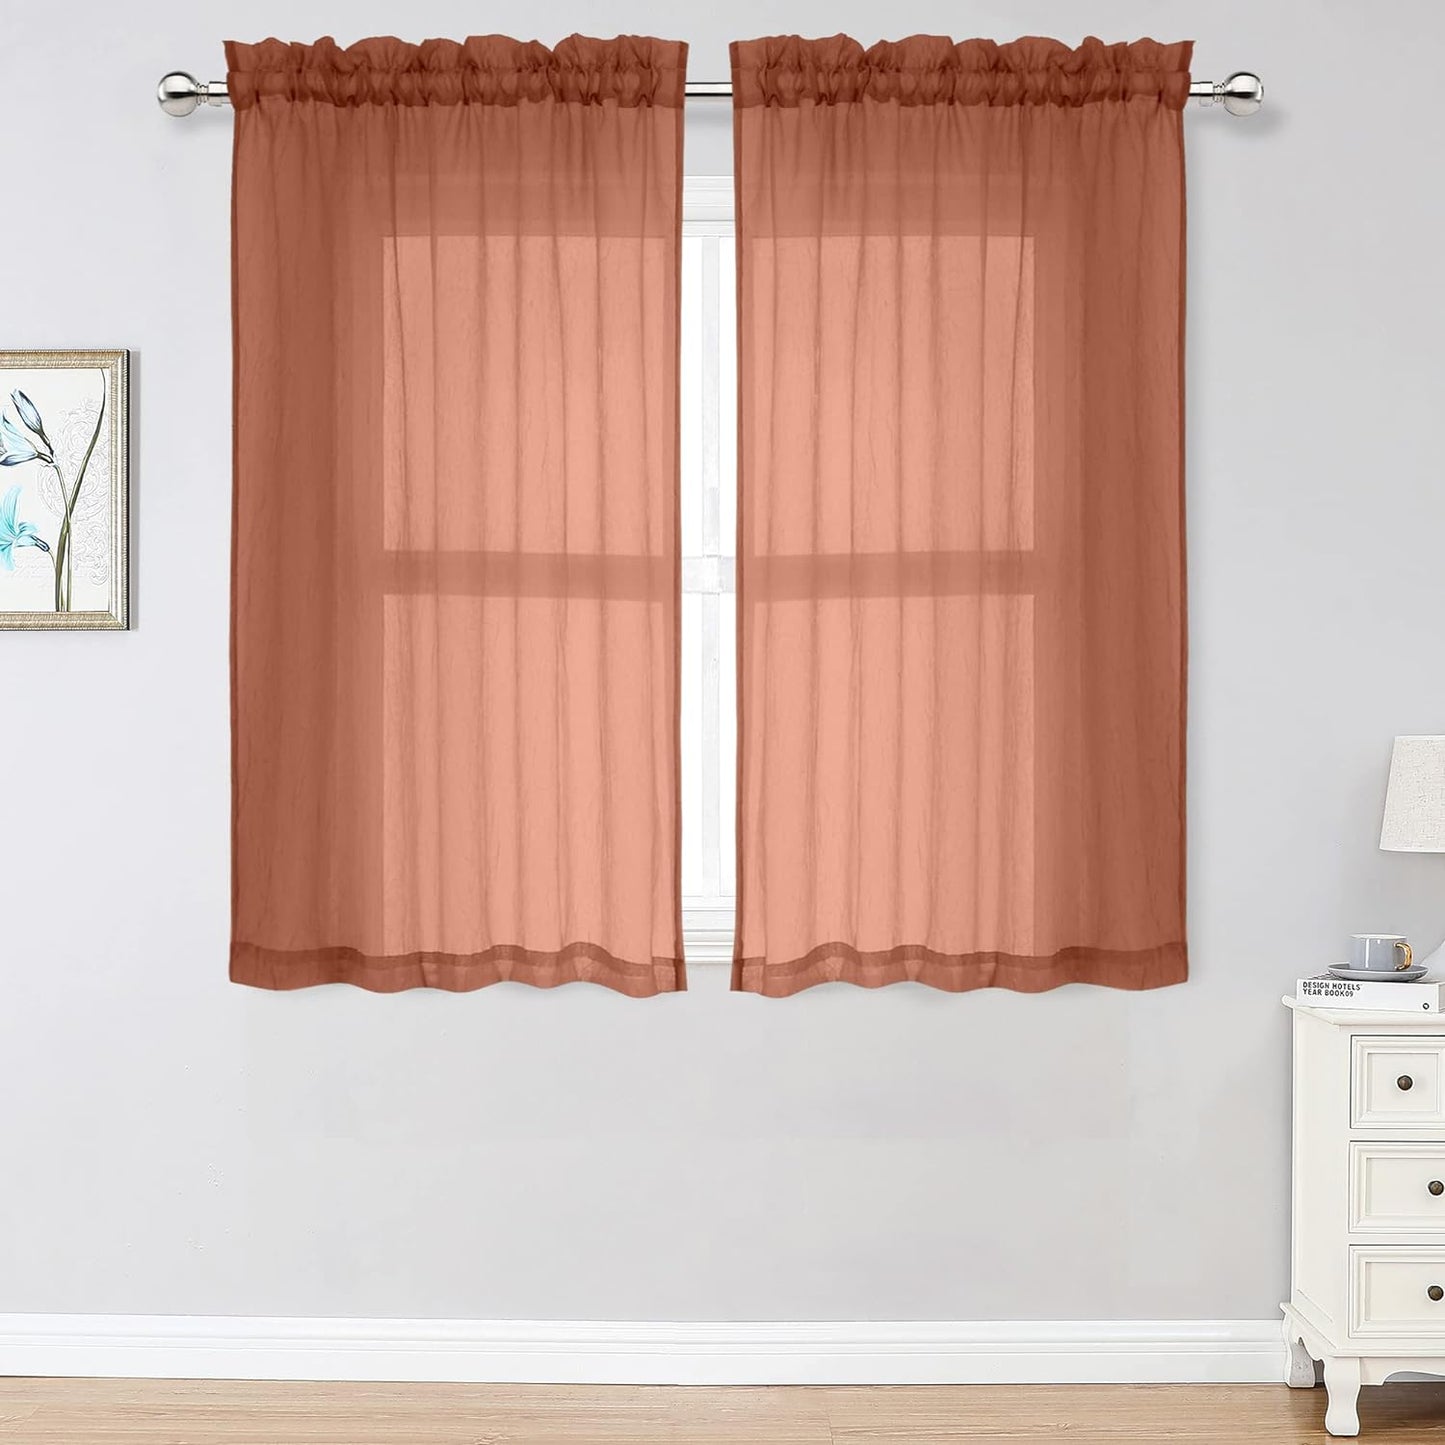 Crushed Sheer White Curtains 63 Inch Length 2 Panels, Light Filtering Solid Crinkle Voile Short Sheer Curtian for Bedroom Living Room, Each 42Wx63L Inches  Chyhomenyc Rust 40 W X 54 L 